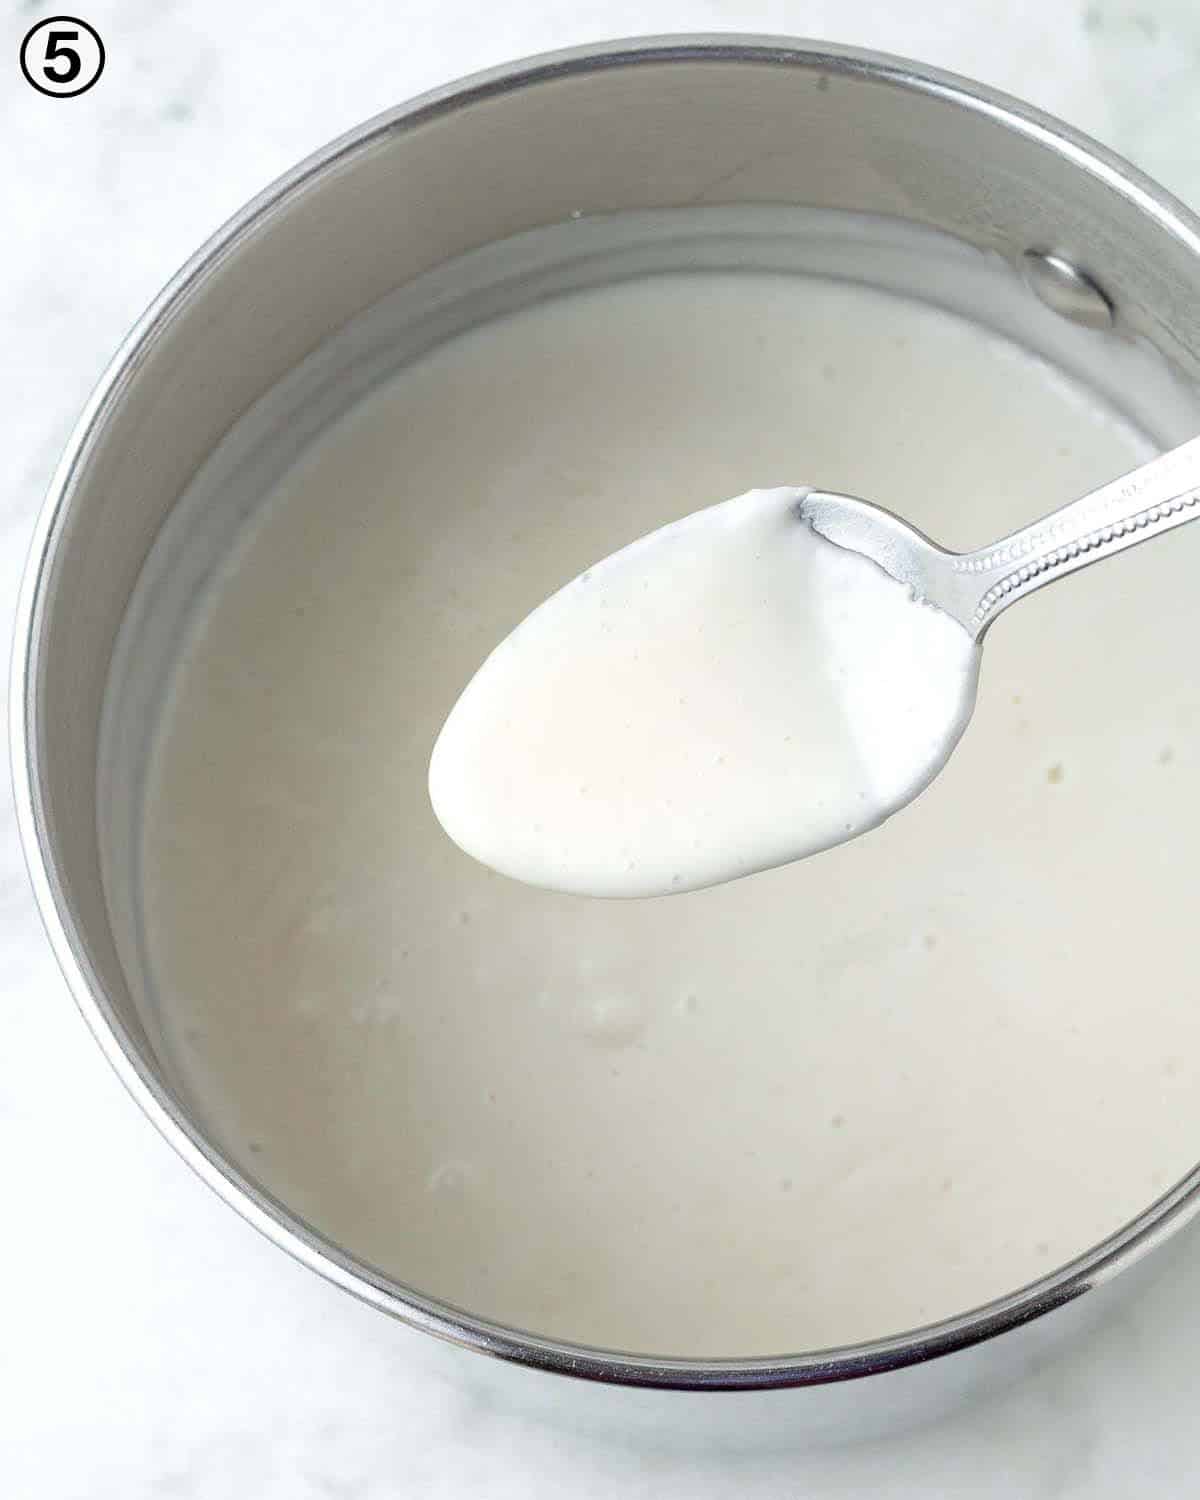 A spoon being held over a pot of cooked vanilla custard, the custard has thickened and is clinging to the spoon.